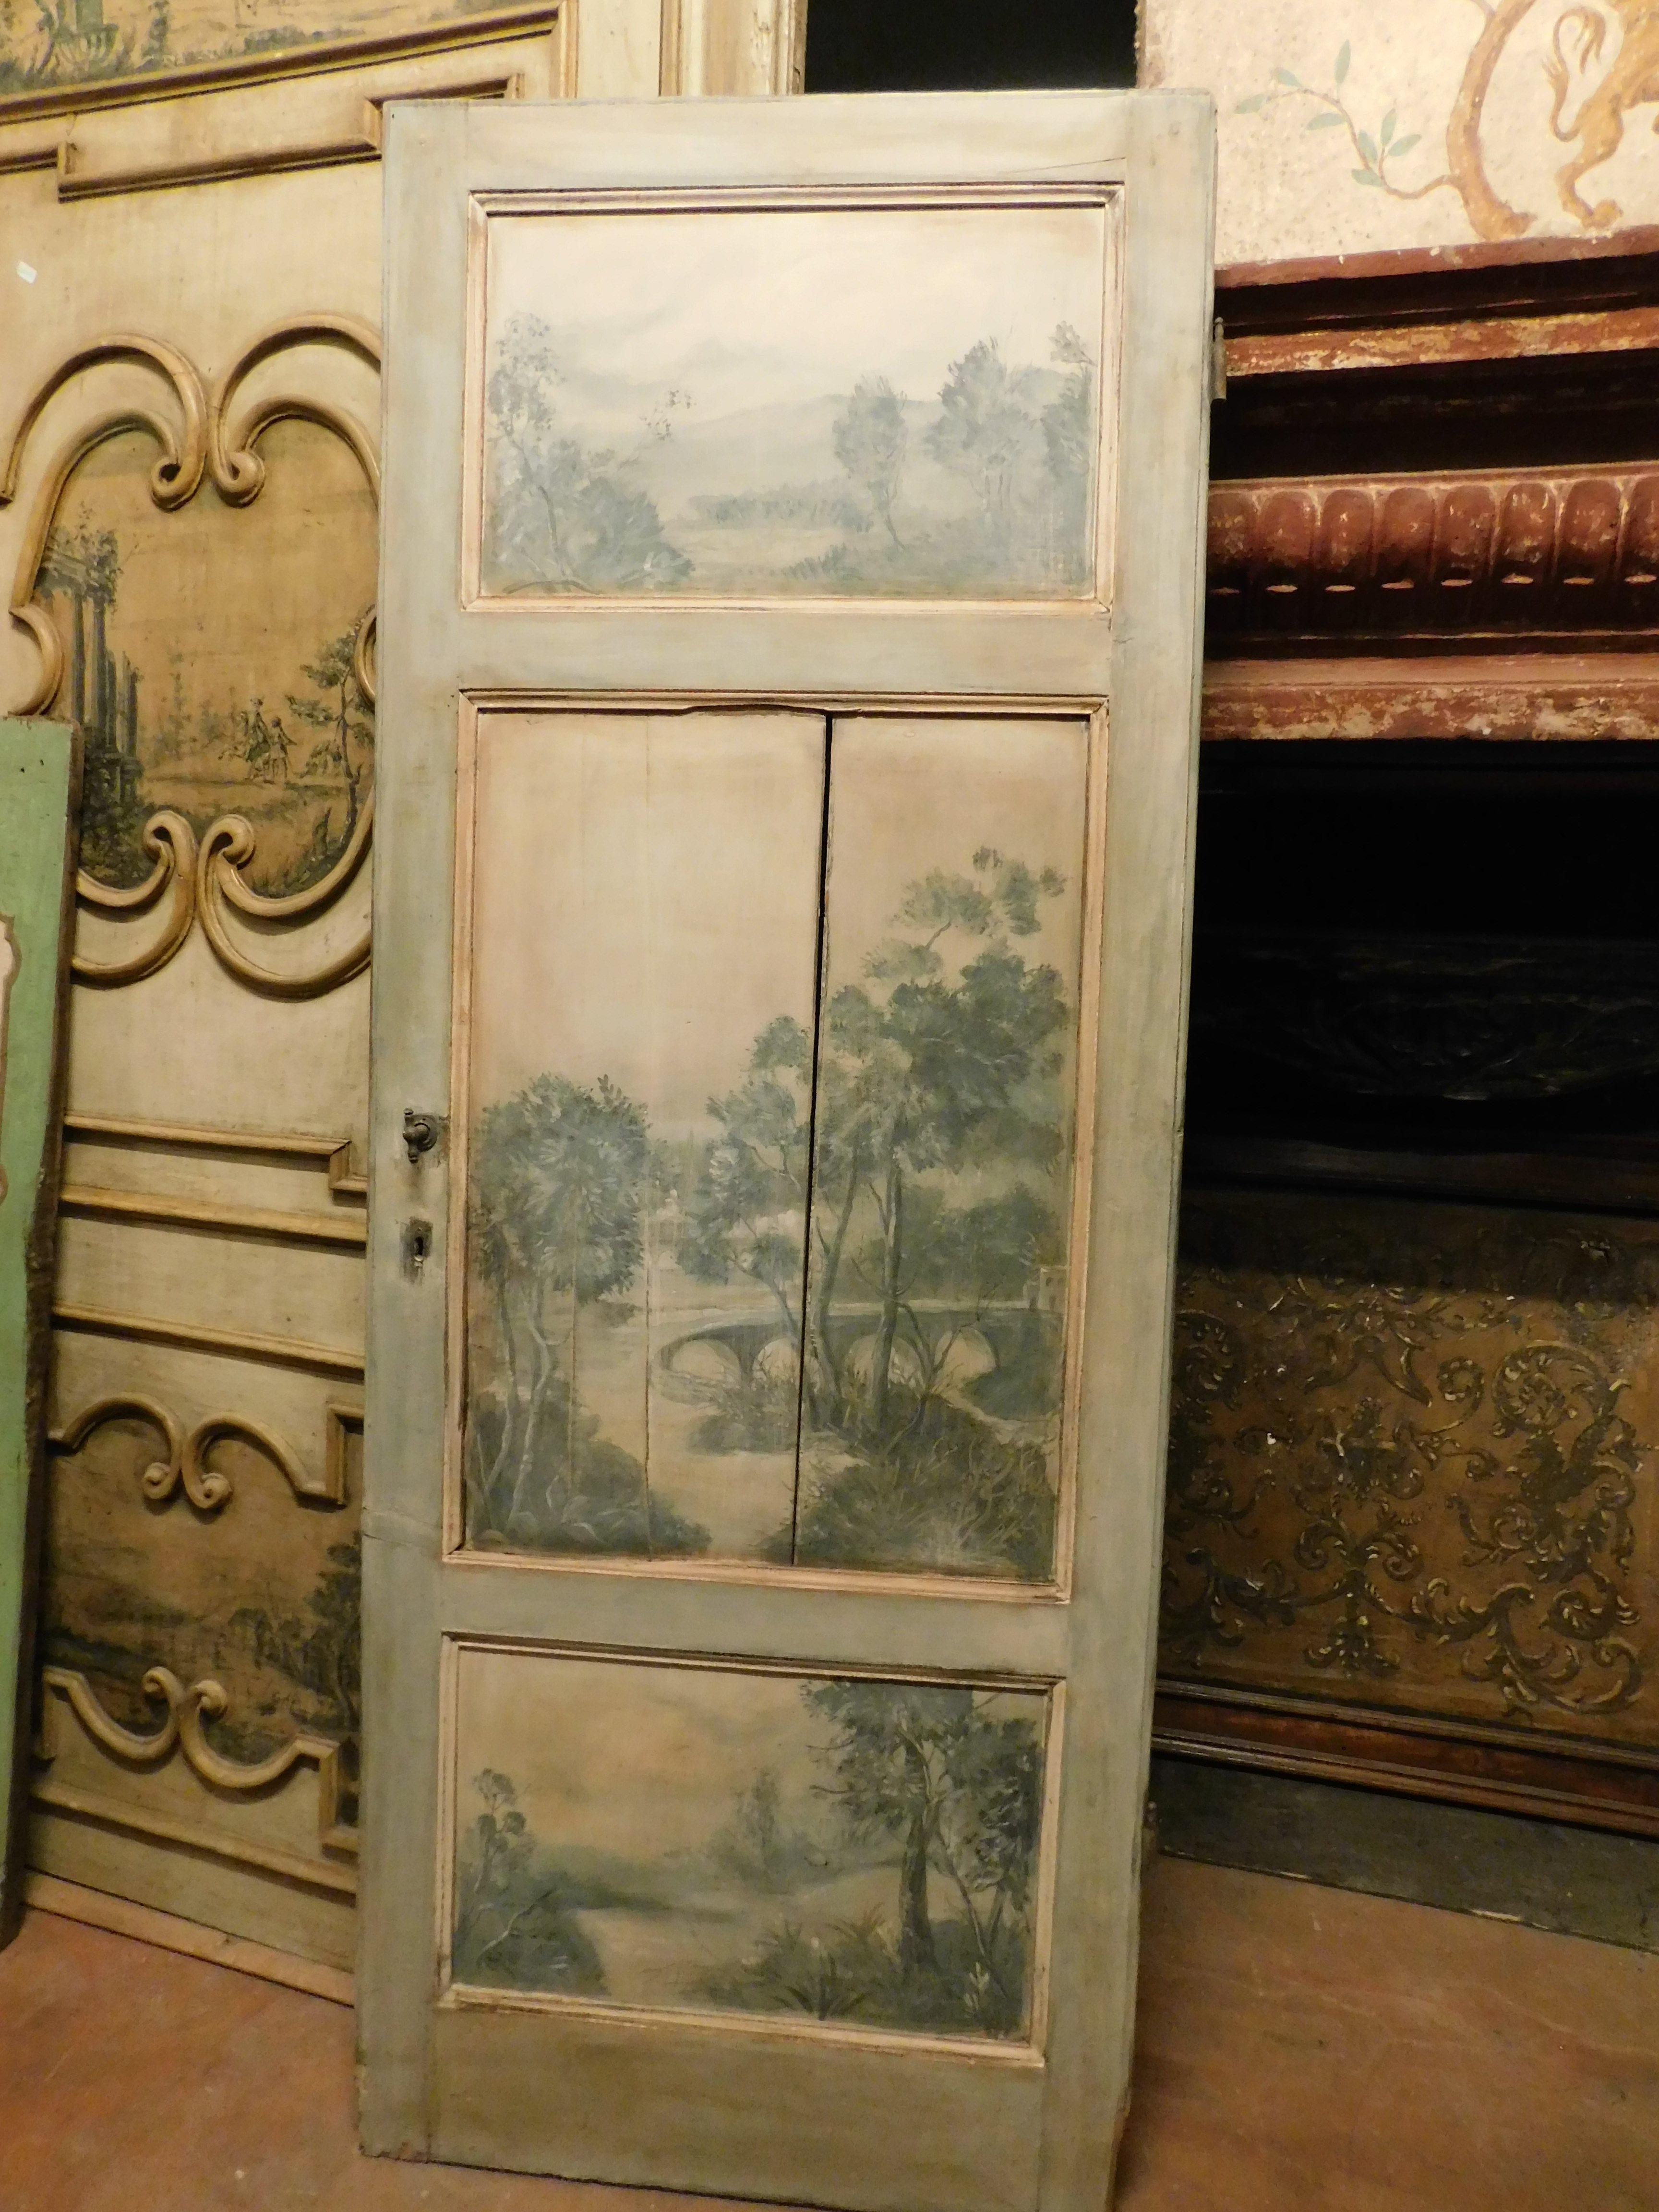 Ancient single door, for interior and without frame, hand painted with a very rich period landscape, divided into 3 panels with a predominance of light blue and grey, handmade by an artisan artist, from Northern Italy, 19th century, maximum size cm